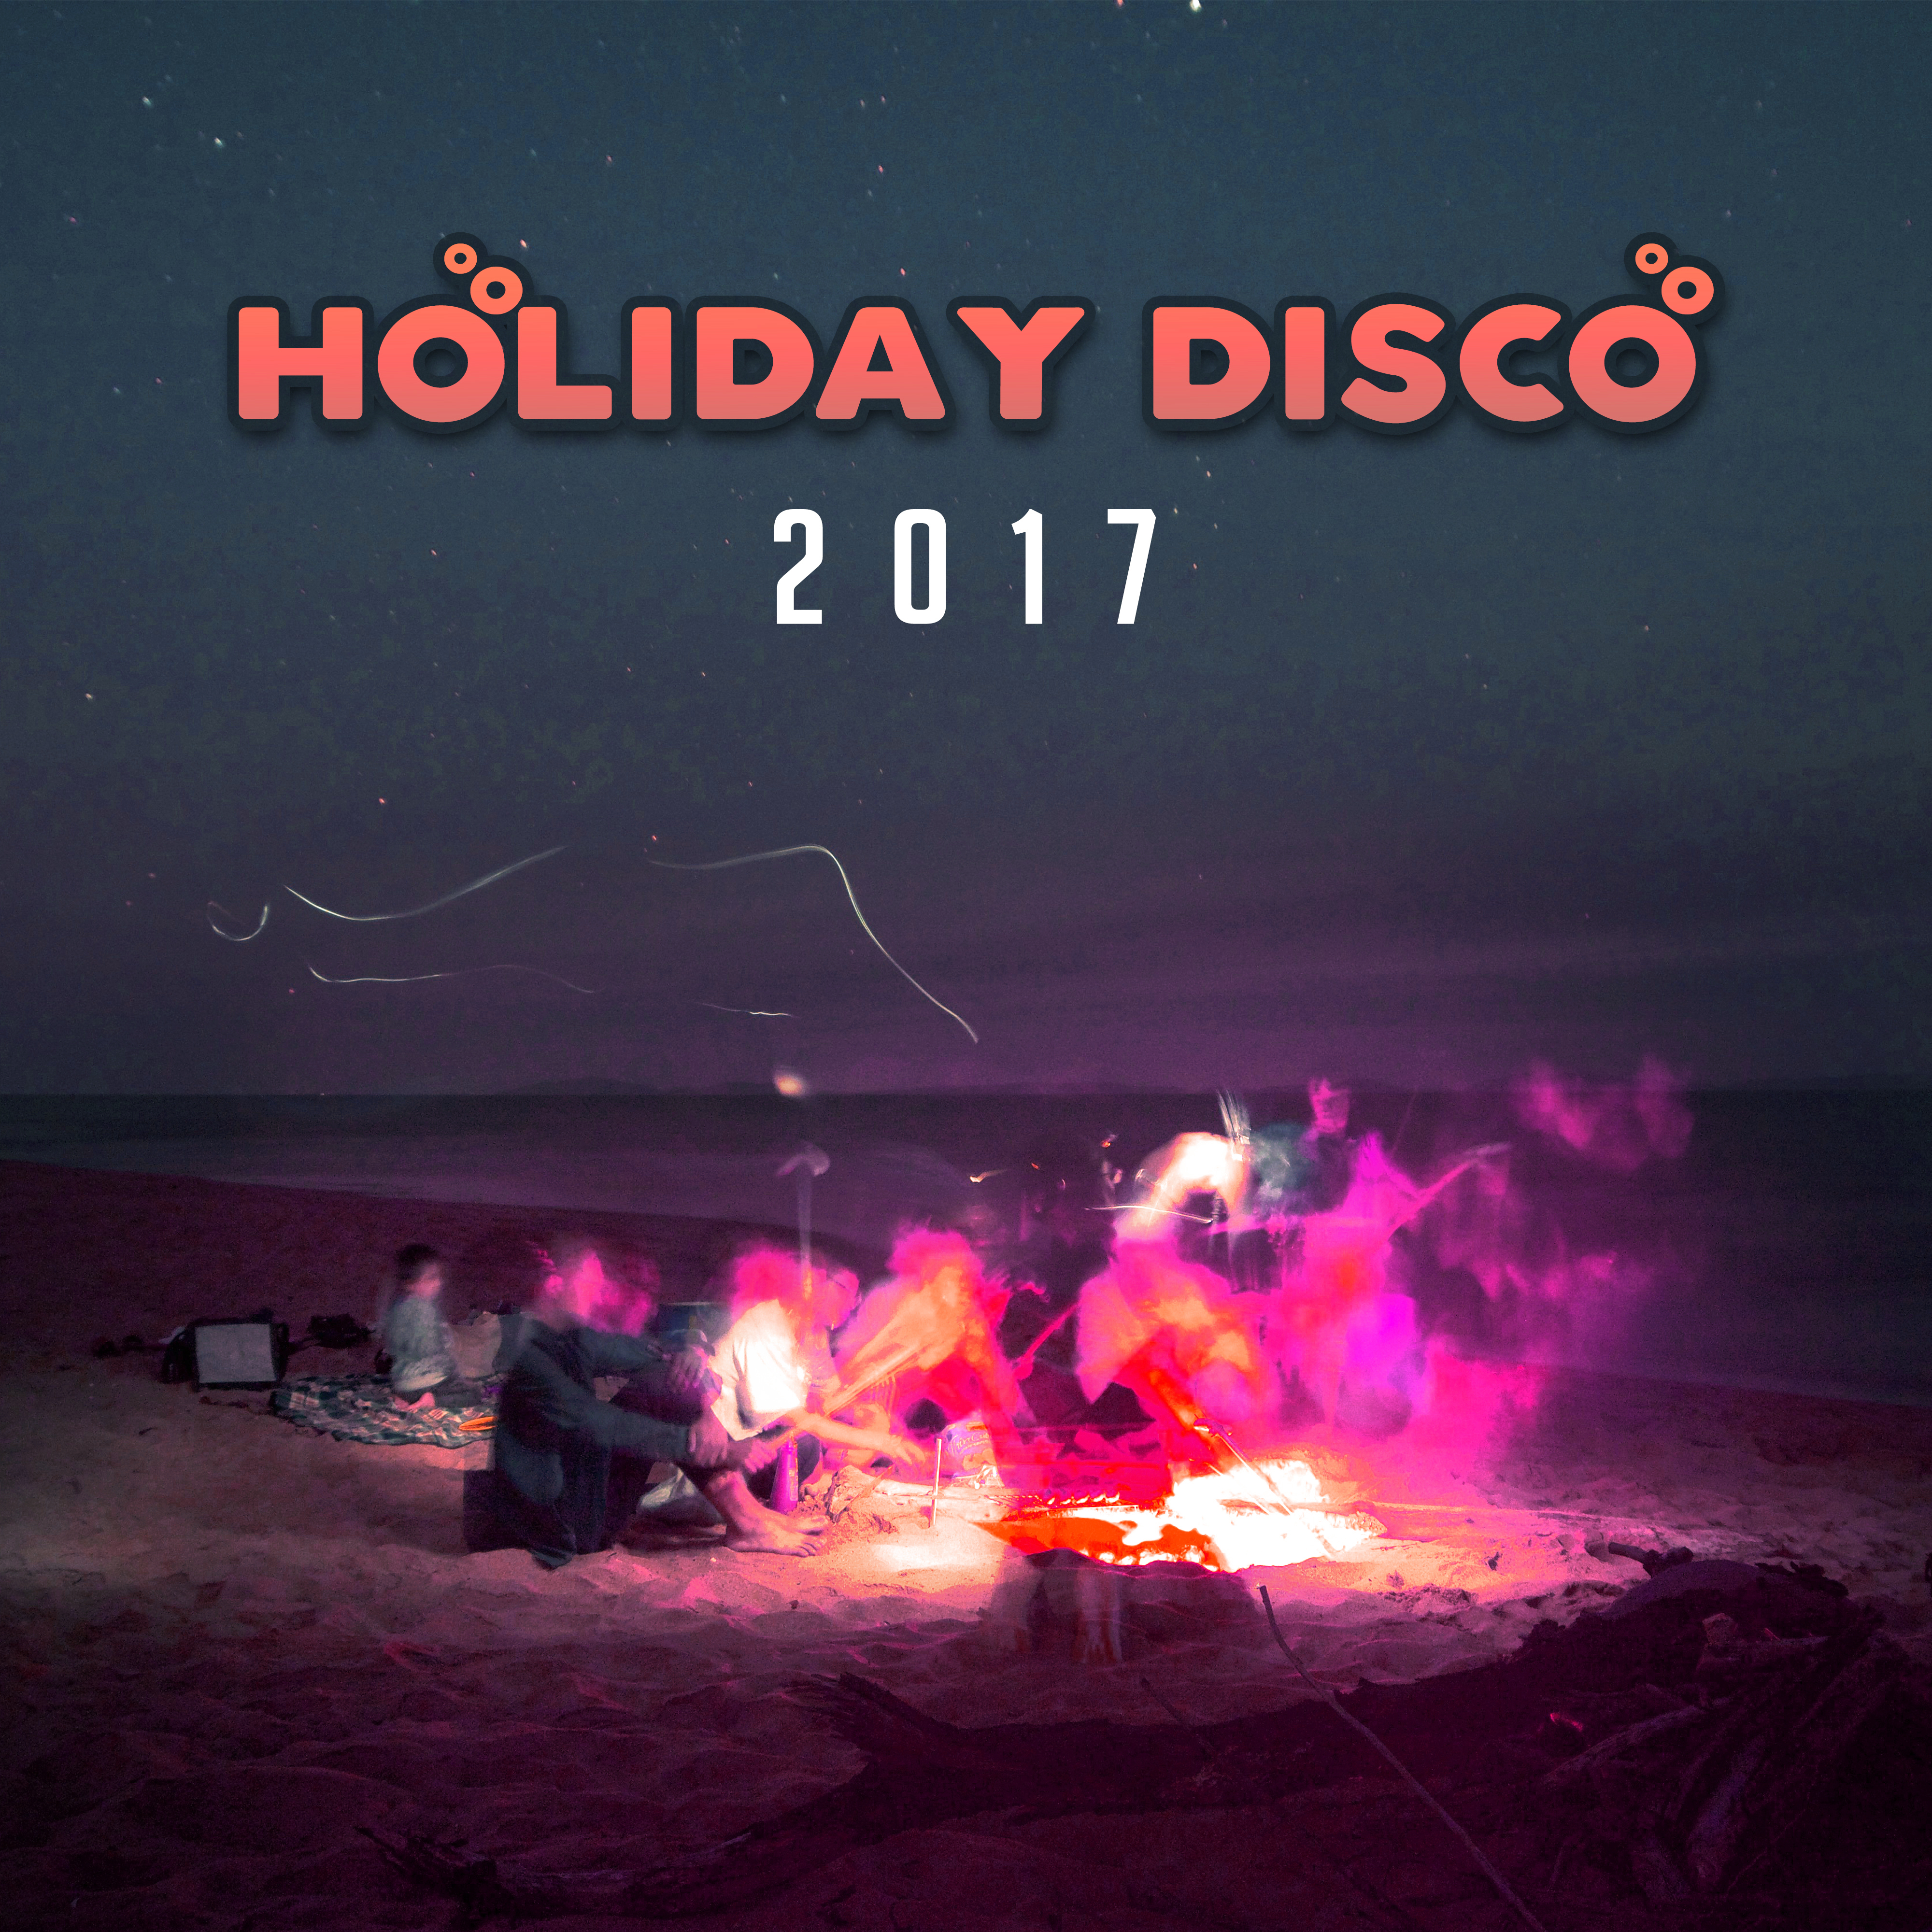 Holiday Disco 2017 – Ibiza Dance Party, Bar Chill Out, *** Music 69, Party Night, Summer Hits 2017